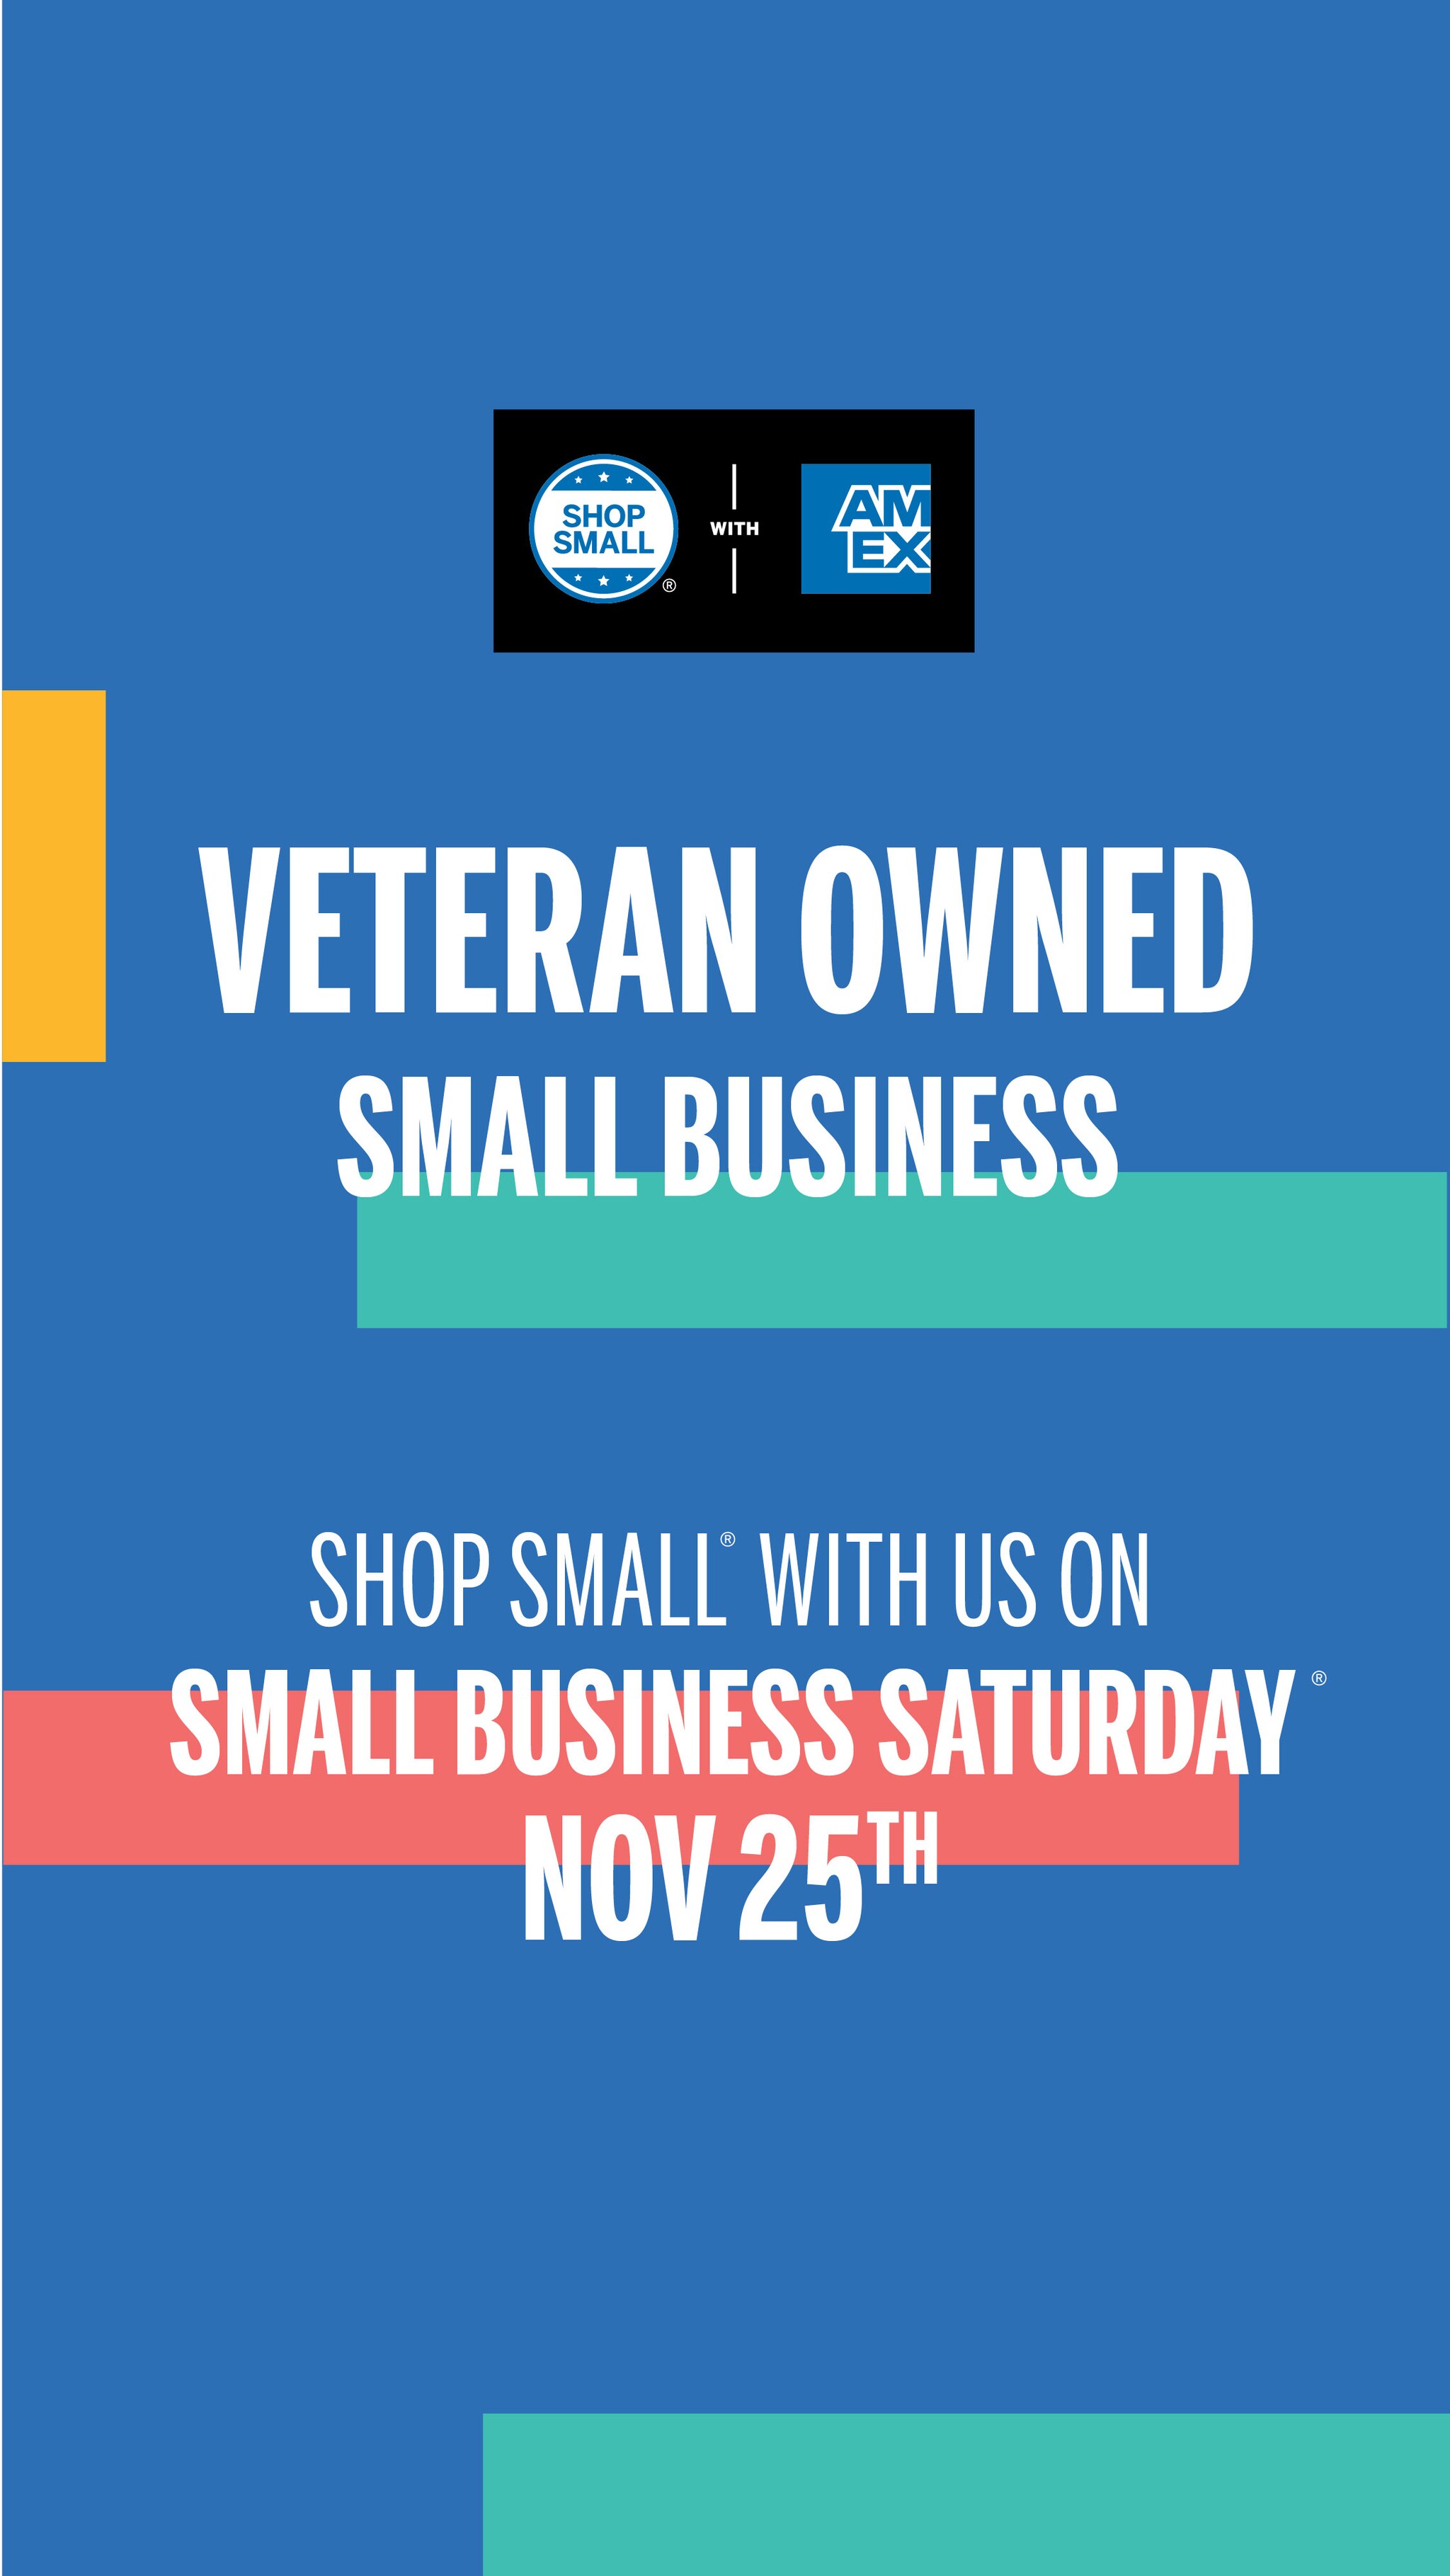 Social Media Story that says Veteran-Owned Small Business. Shop Small with us on Small Business Saturday Nov 25th.